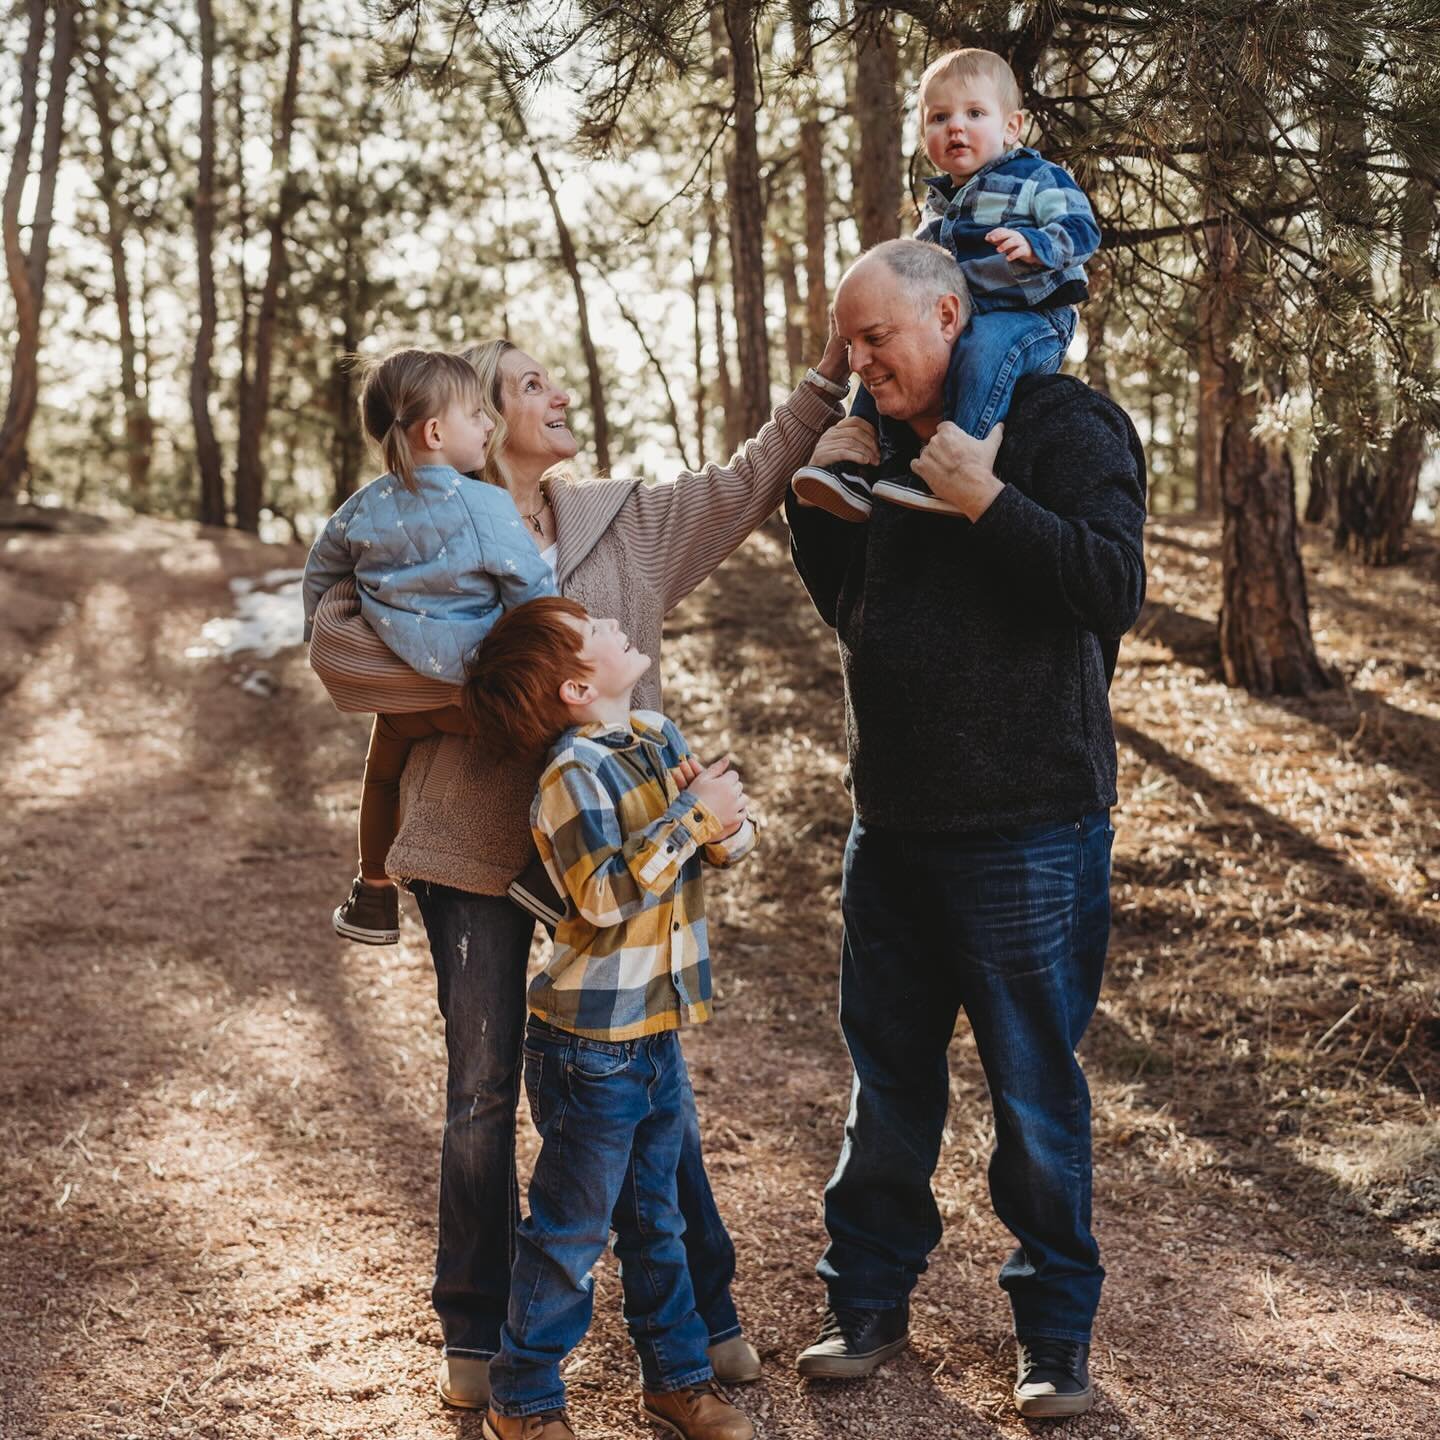 Imagine this&hellip; Grandma and Grandpa take the grandkids for the morning and go on a nature walk. And I just happen to hang around and capture the fun! 🌲 

#coloradospringsfamilyphotographer
#exploringcoloradosprings 
#letthembelittle